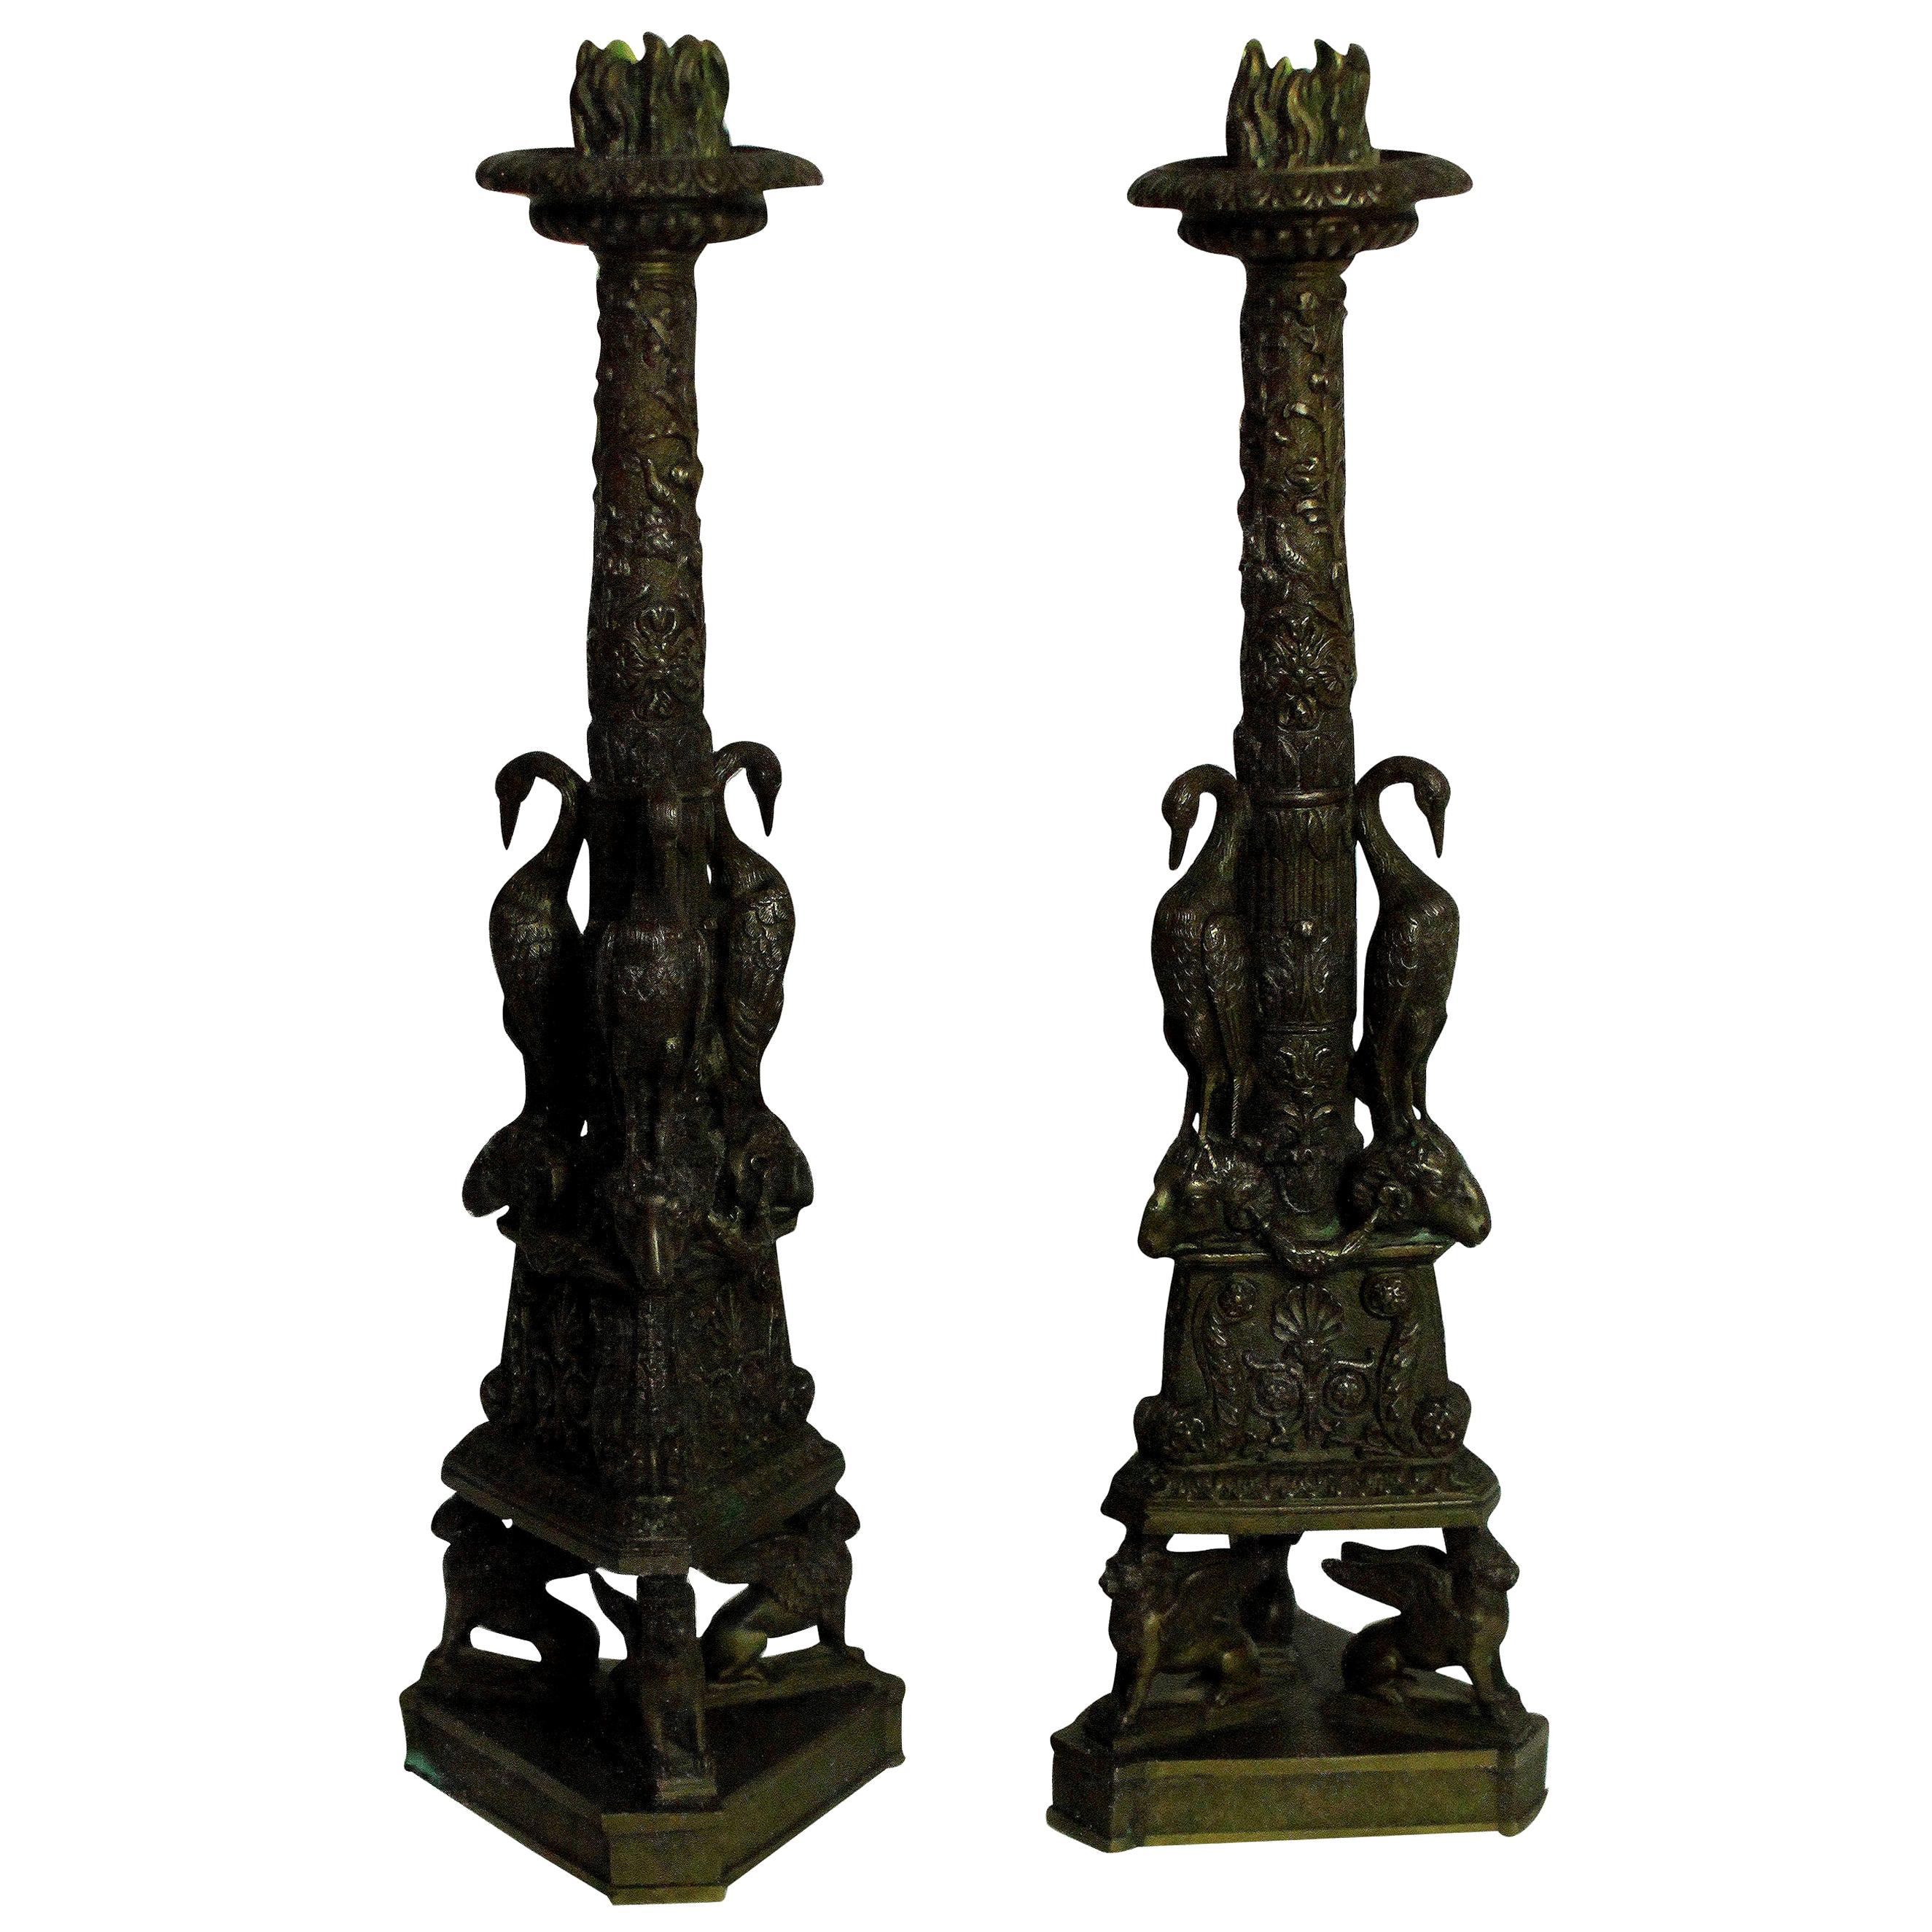 Pair of Exceptional Bronze Candlesticks after the Piranesi Model